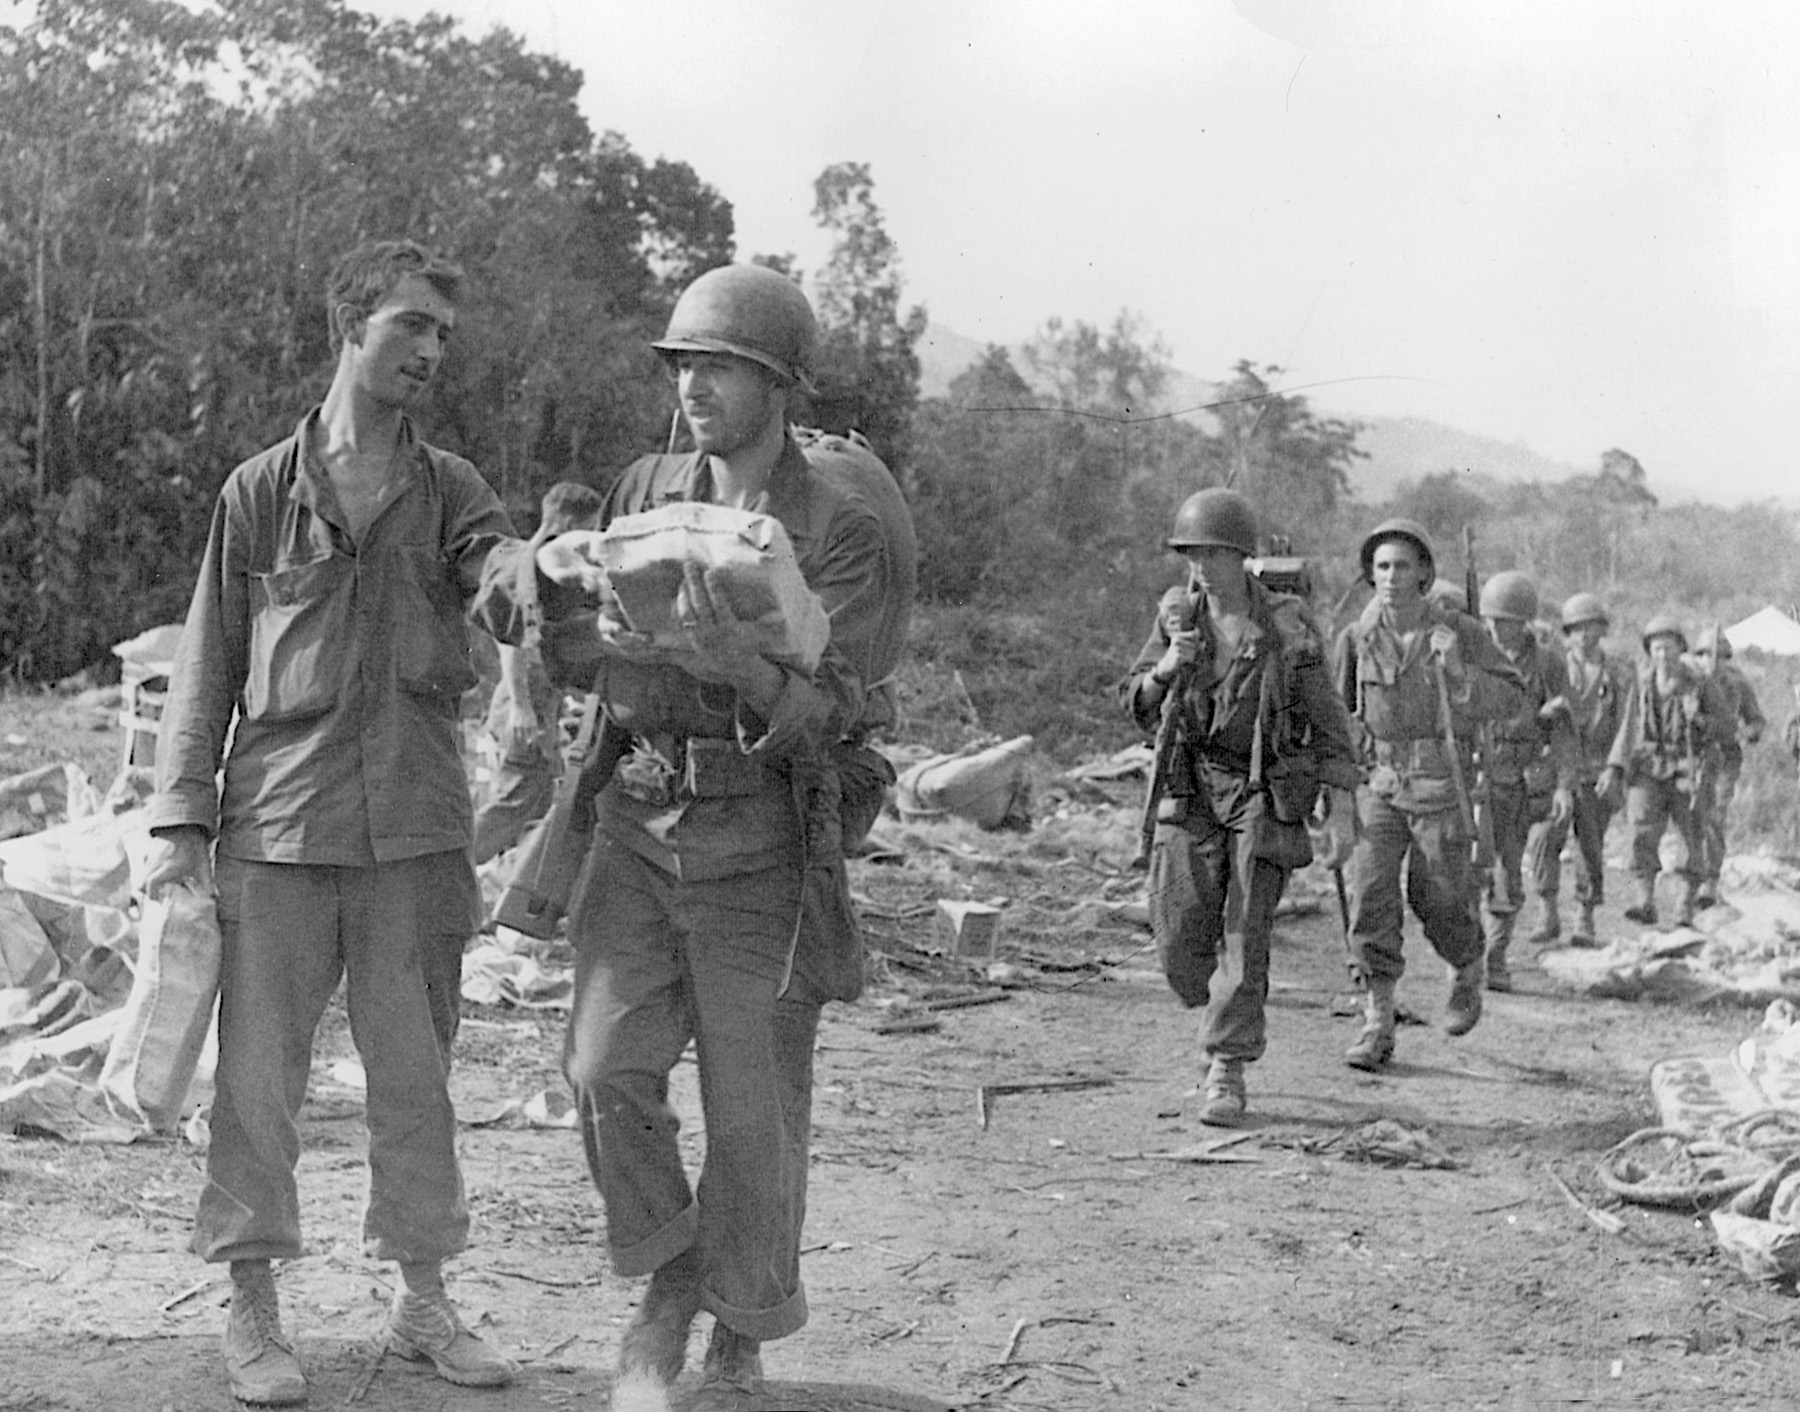 Marauders set out once again after picking up much-needed supplies, including three-day K-ration boxes.